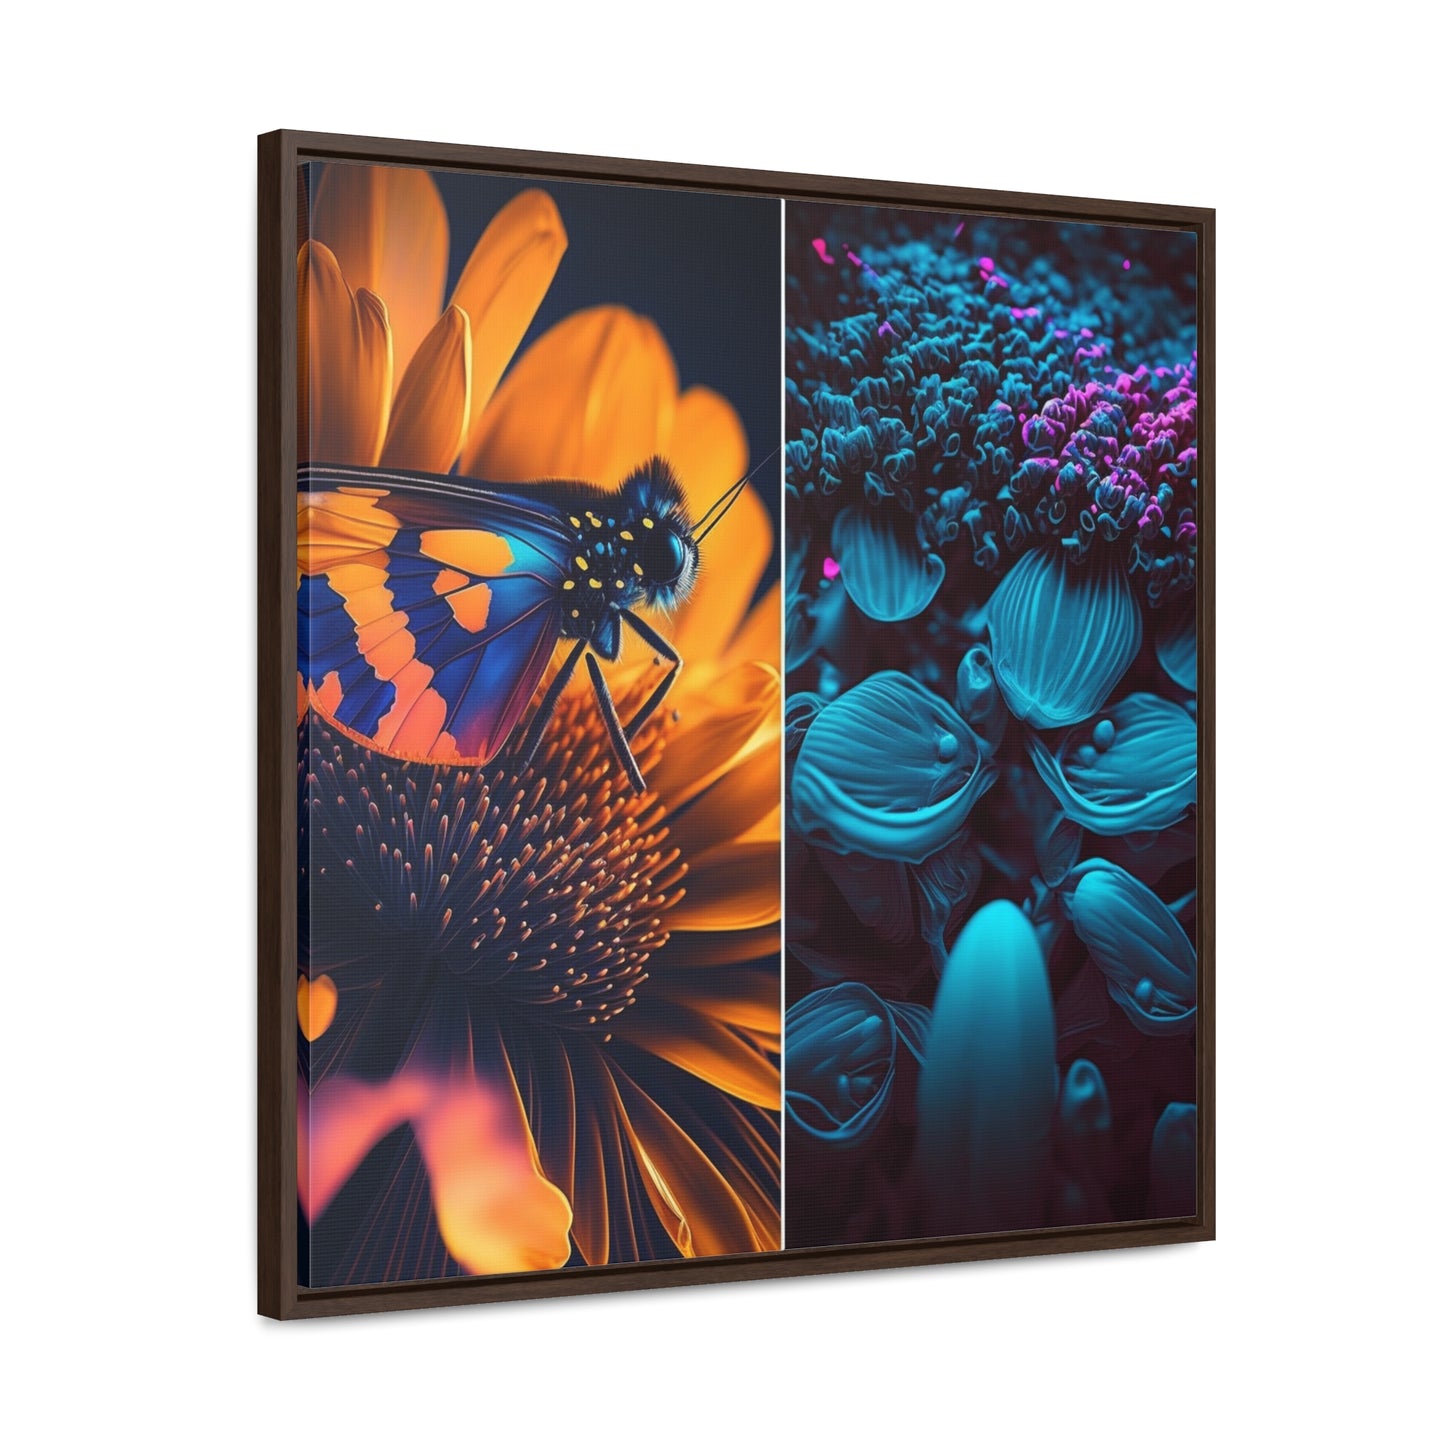 Gallery Canvas Wraps, Square Frame Macro Reef Florescent 1